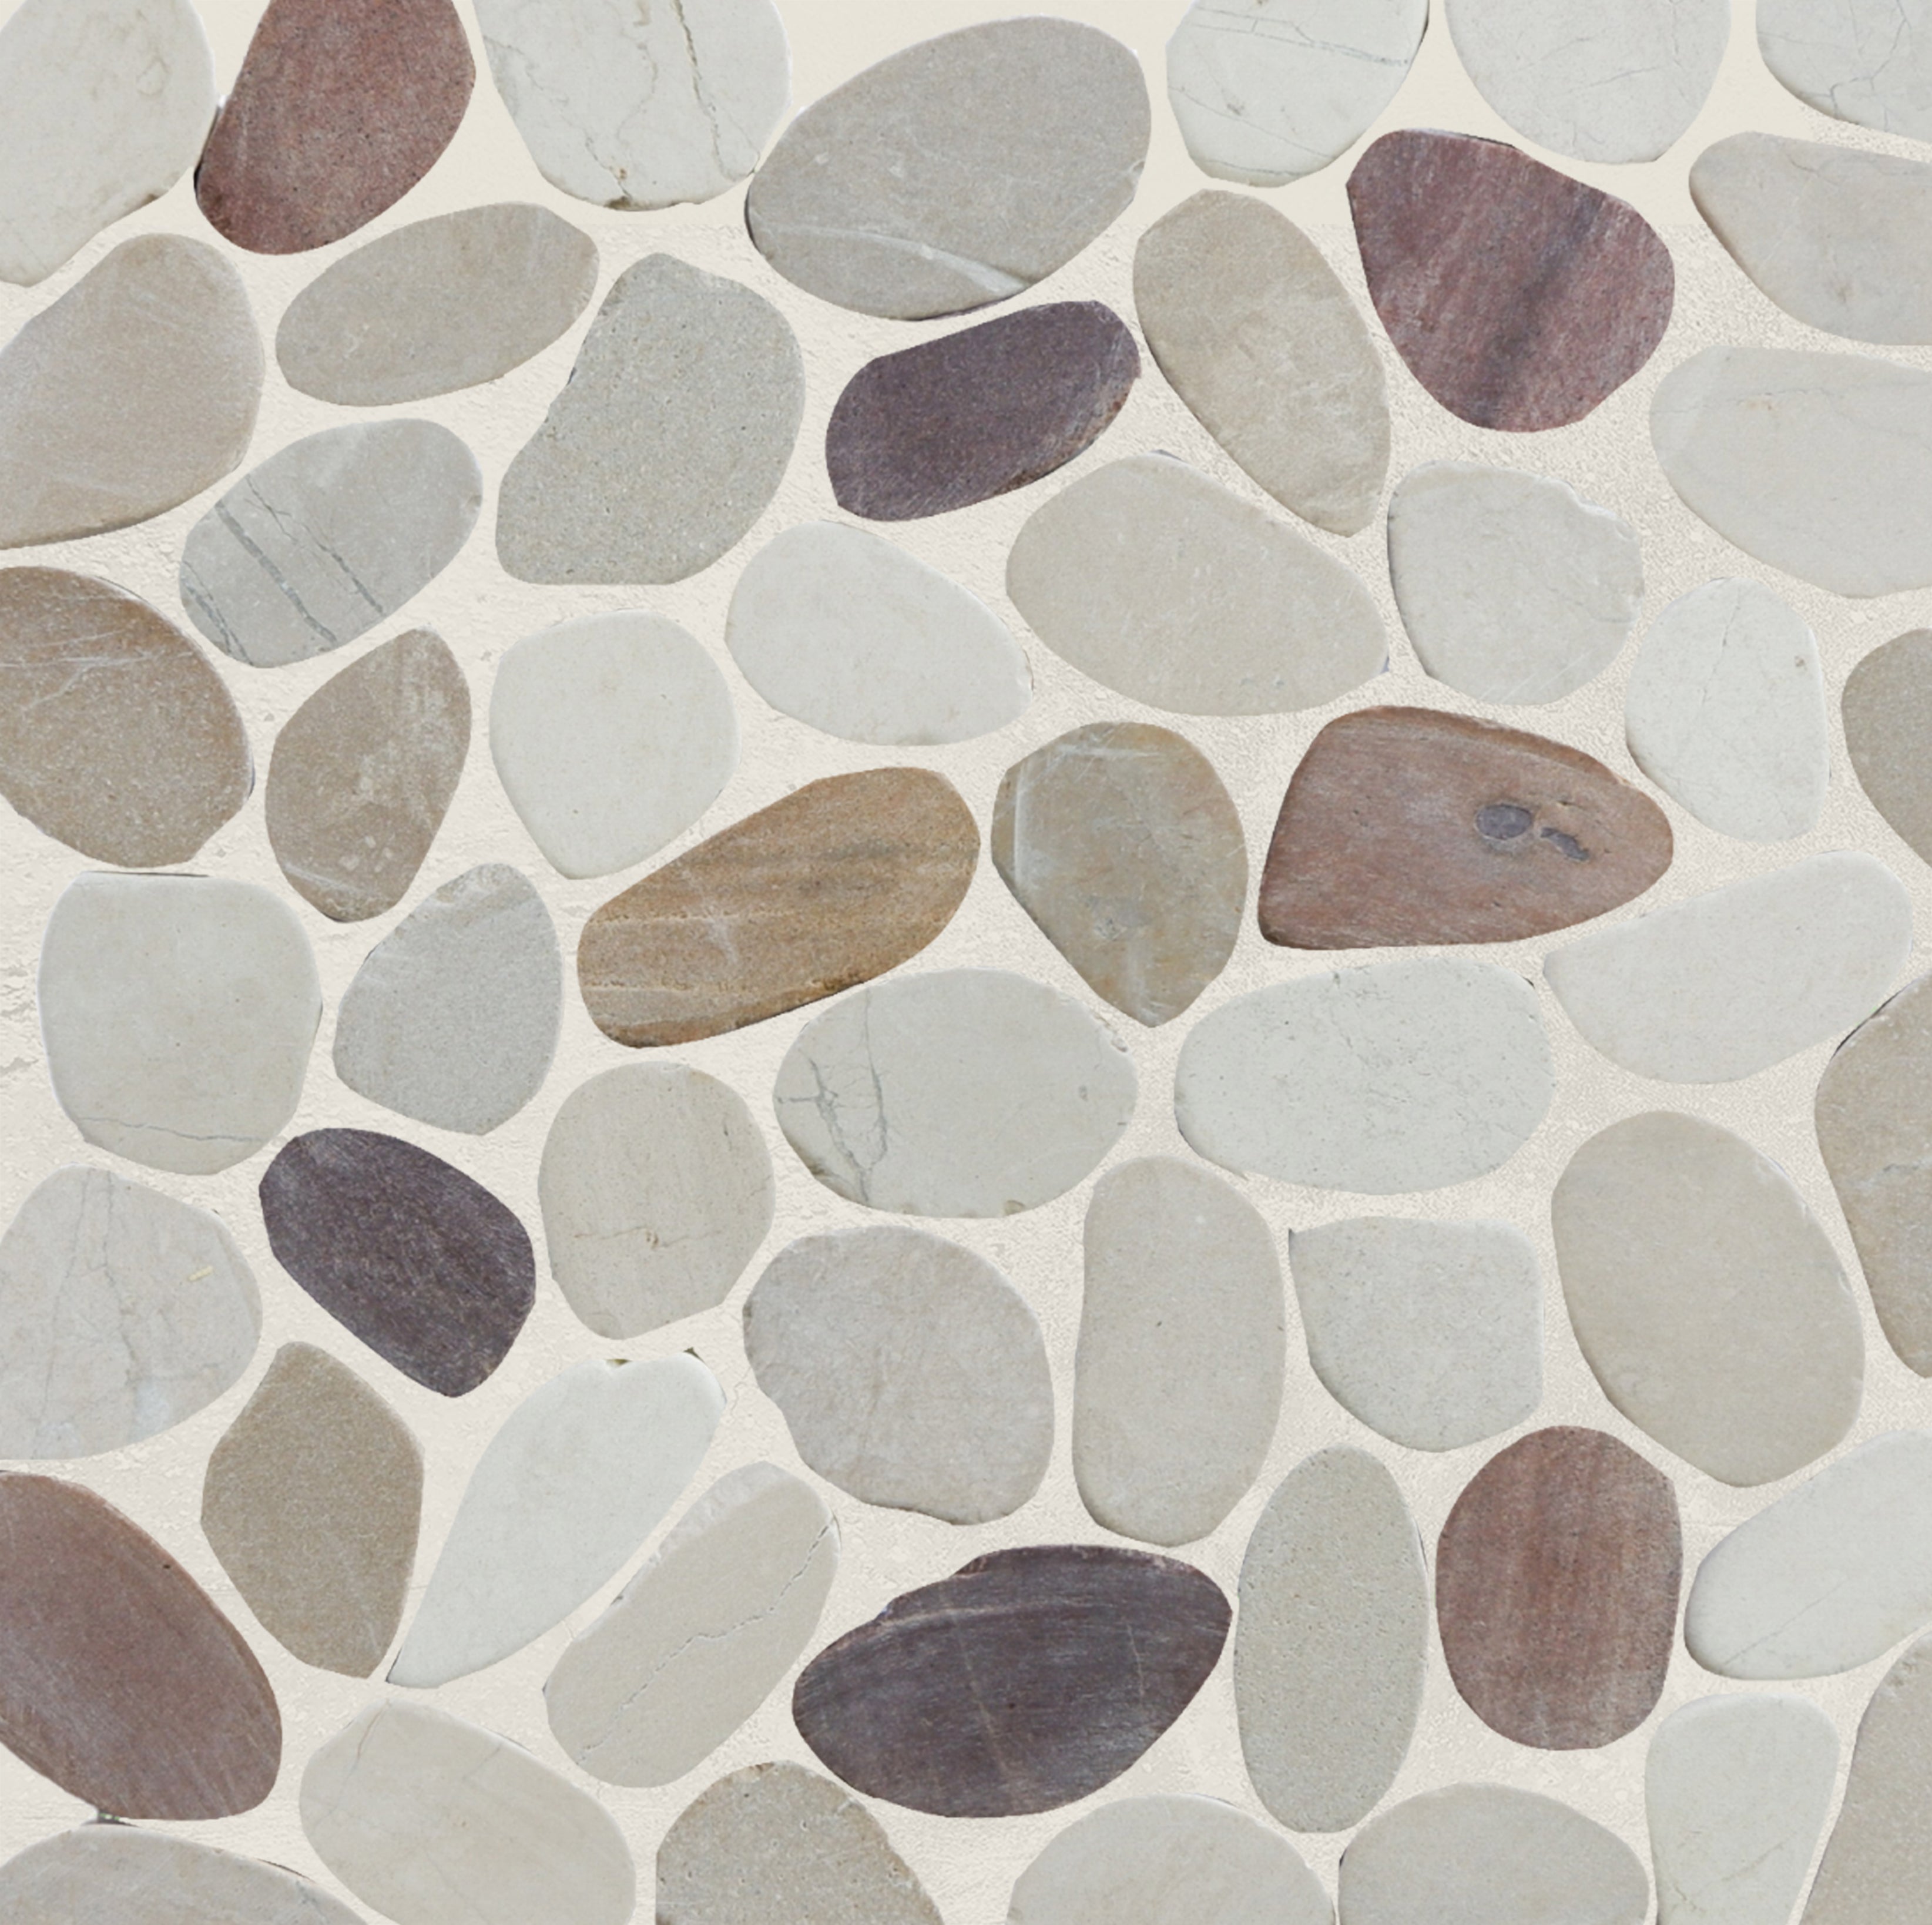 Cherry sliced pebble tile sample close up with grout